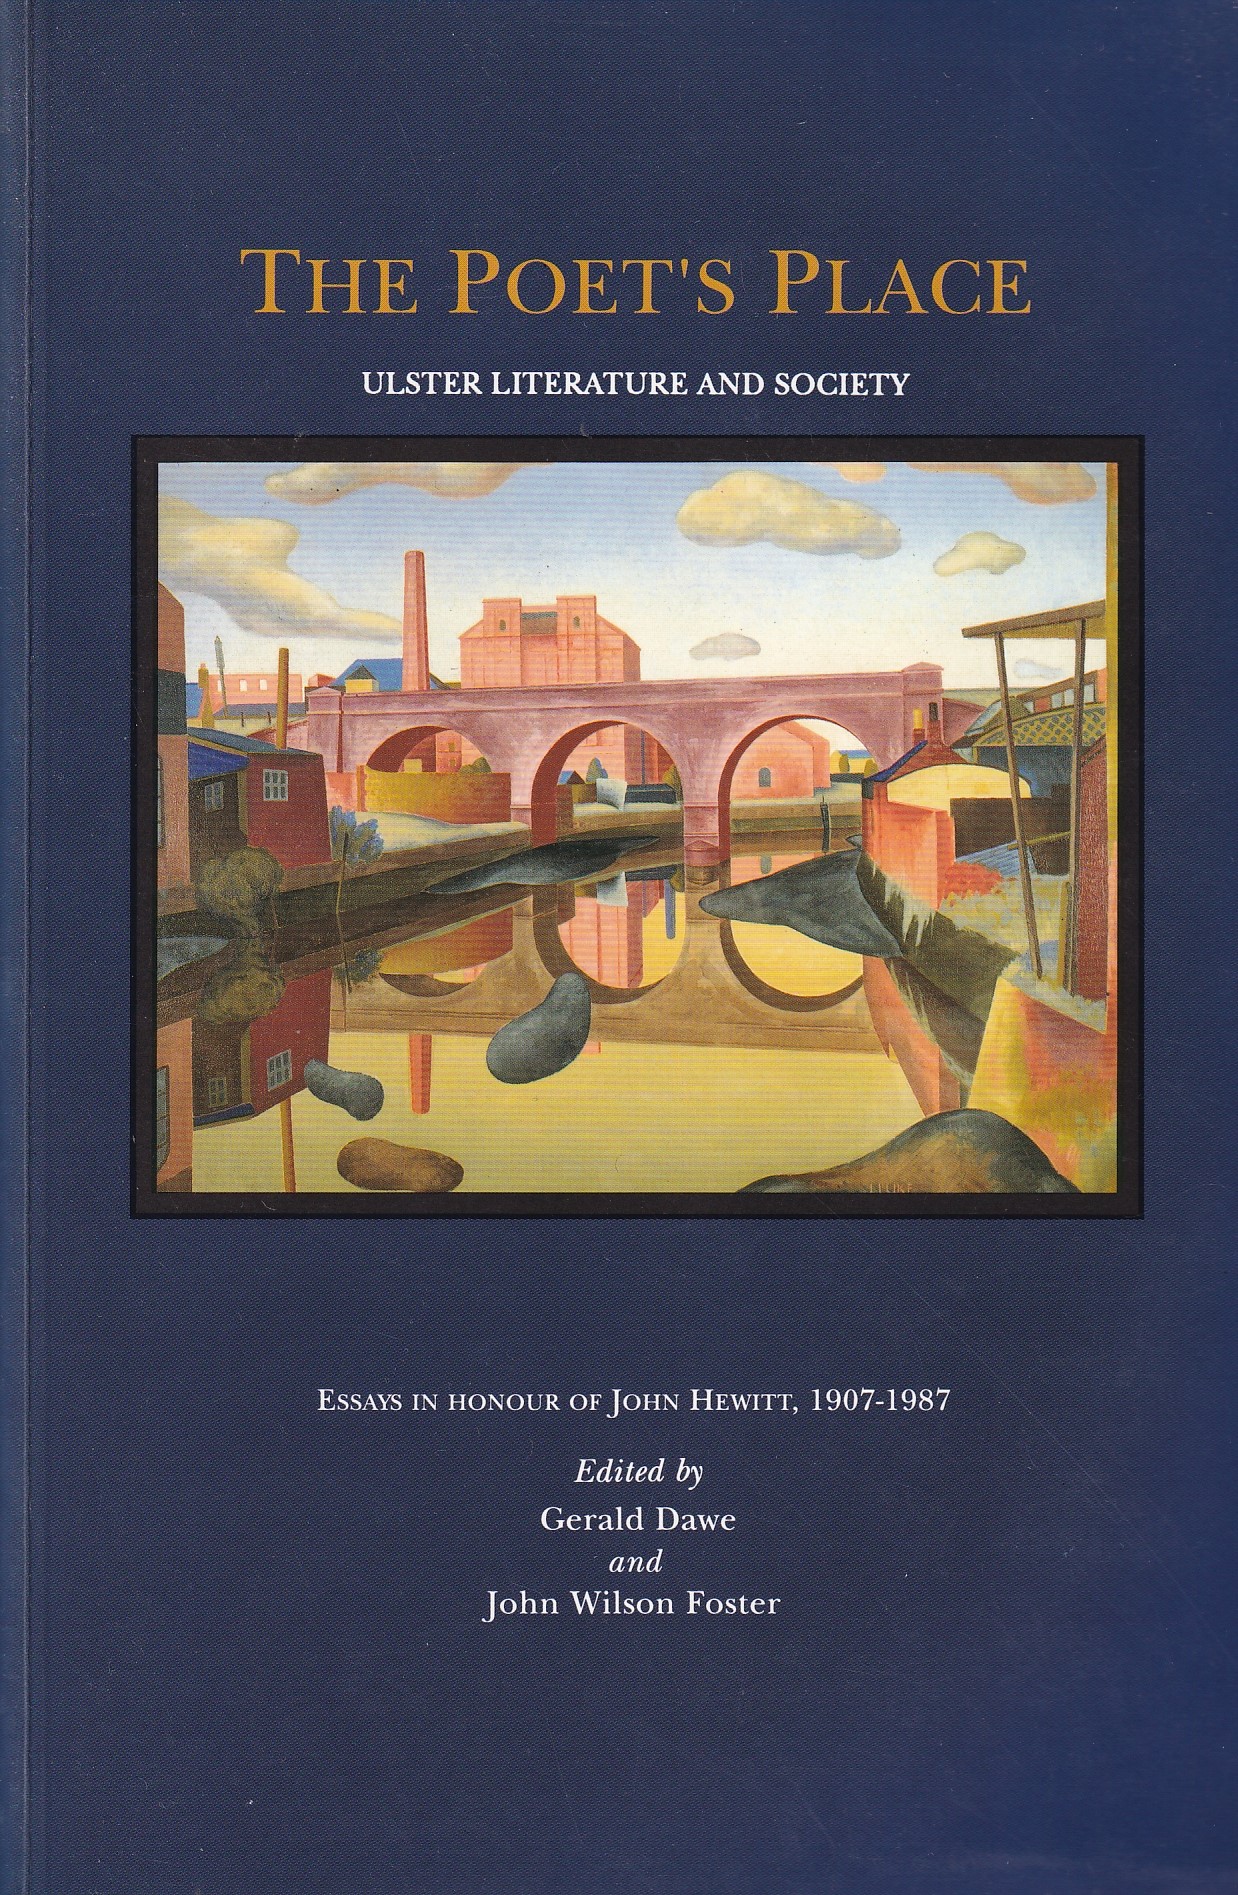 The Poet’s Place: Ulster Literature and Society – Essays in Honour of John Hewitt, 1907-1987 | Gerald Dawe & John Wilson Foster | Charlie Byrne's